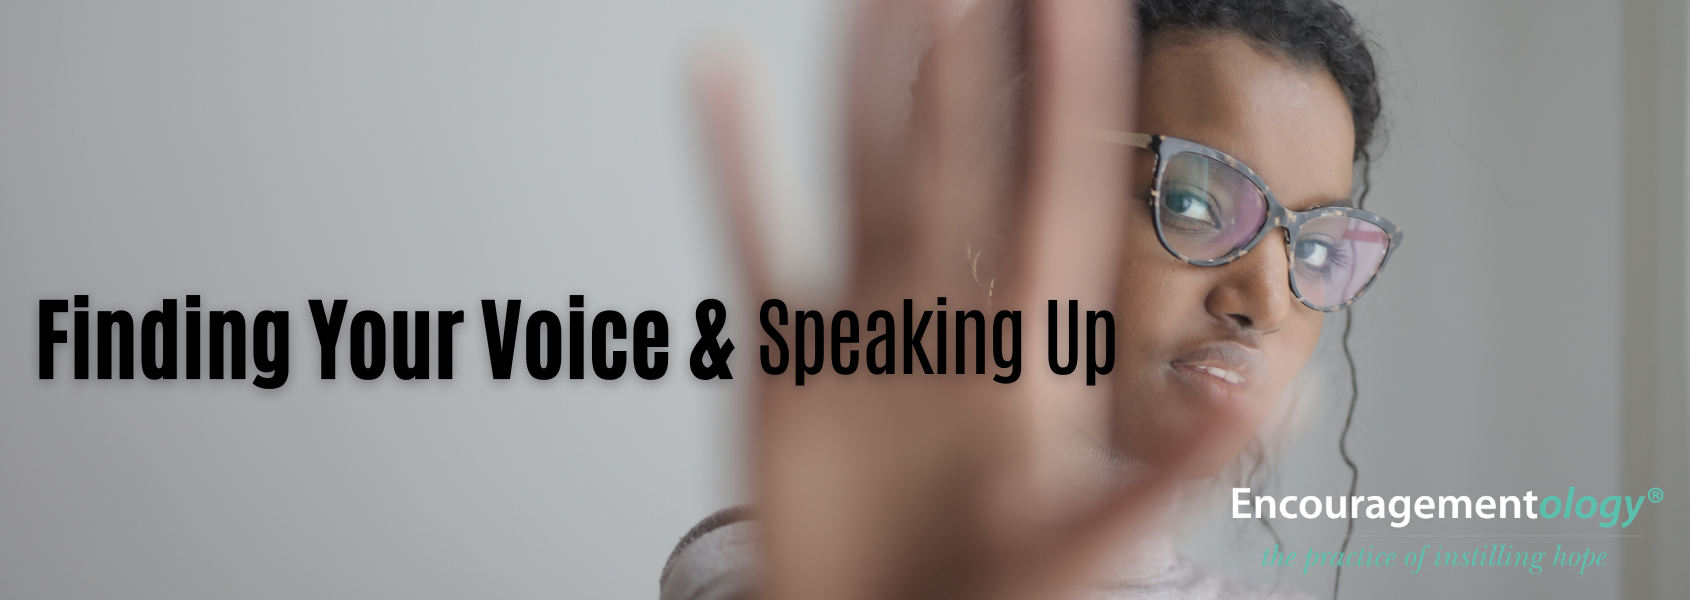 Finding Your Voice and Speaking Up